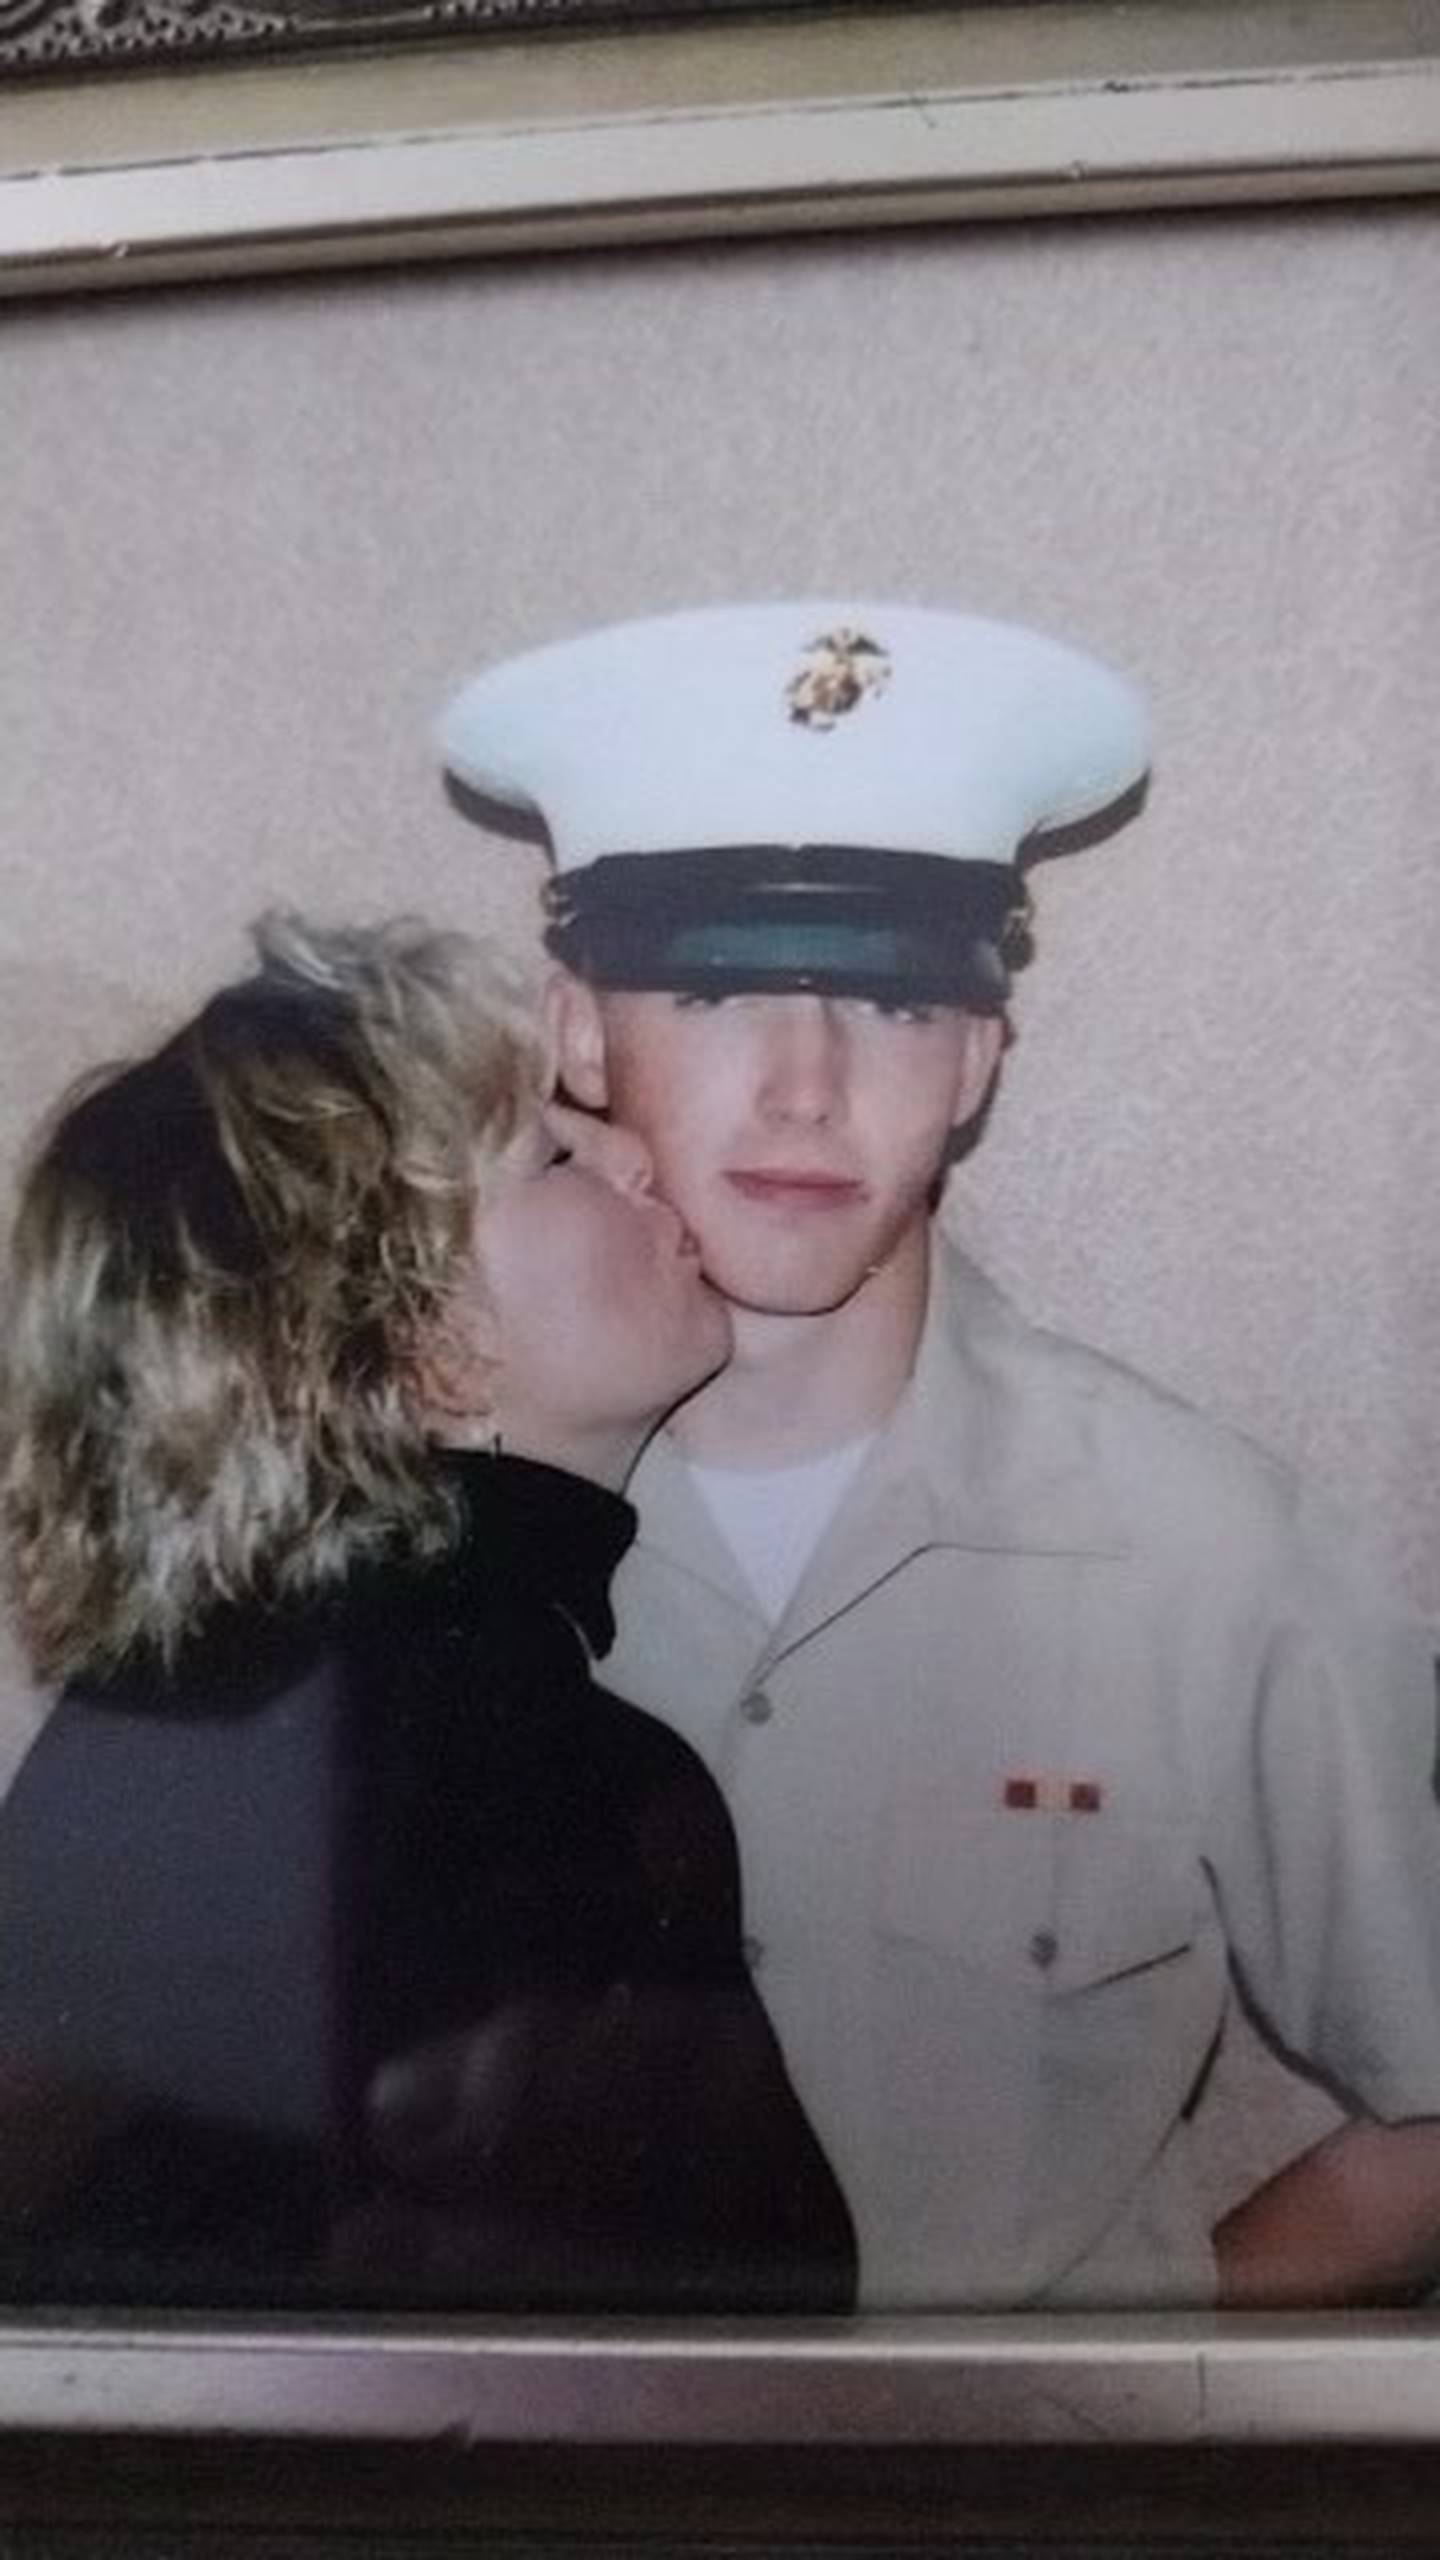 Patrick McDowell, who was 20 at the time this photo was taken, and his mom.